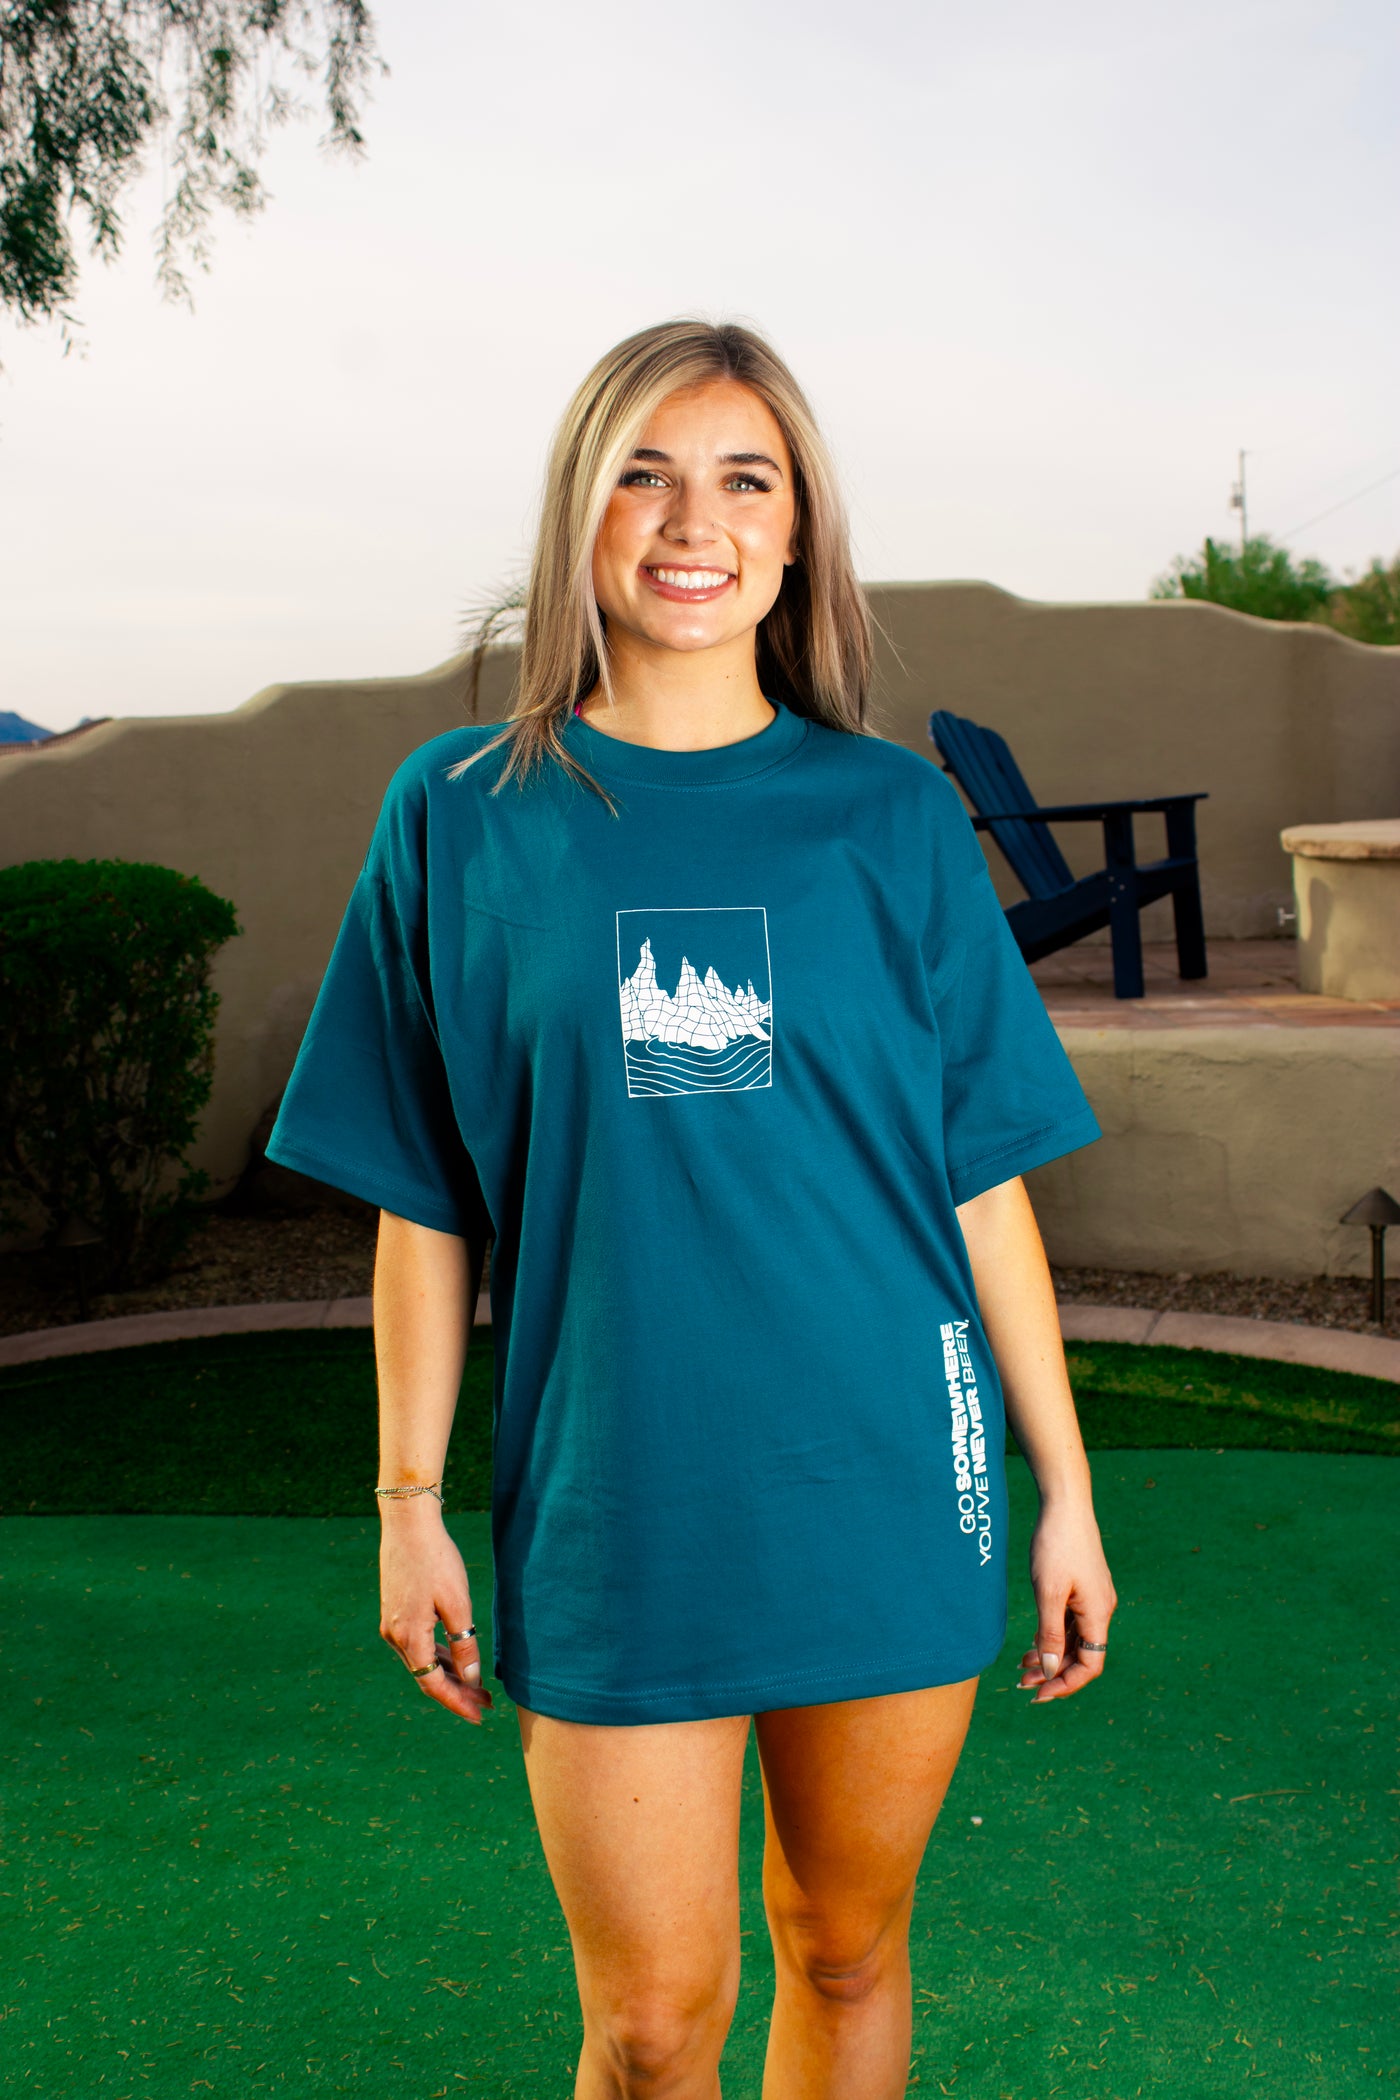 Walk The Earth T-Shirt in Teal